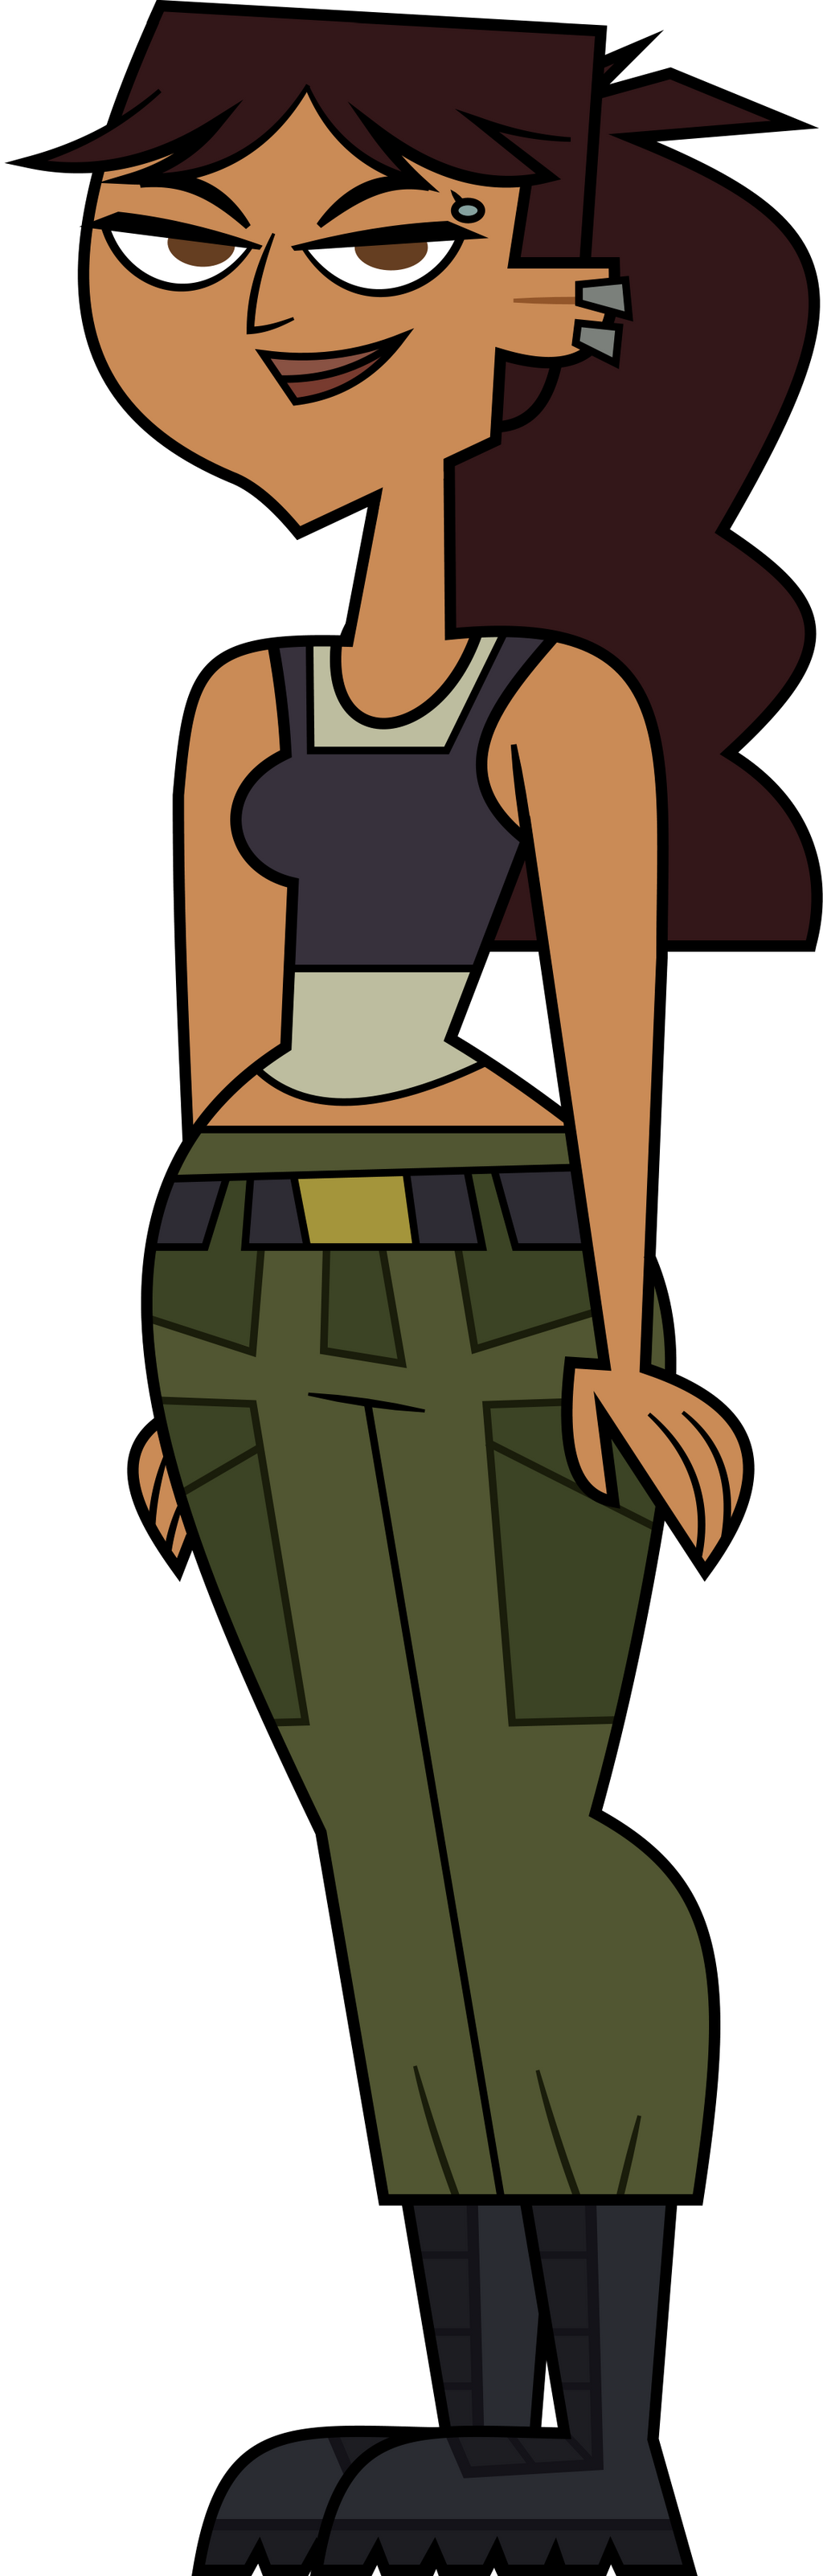 Total Drama 2023 Characters As Adults by lonerpx on DeviantArt